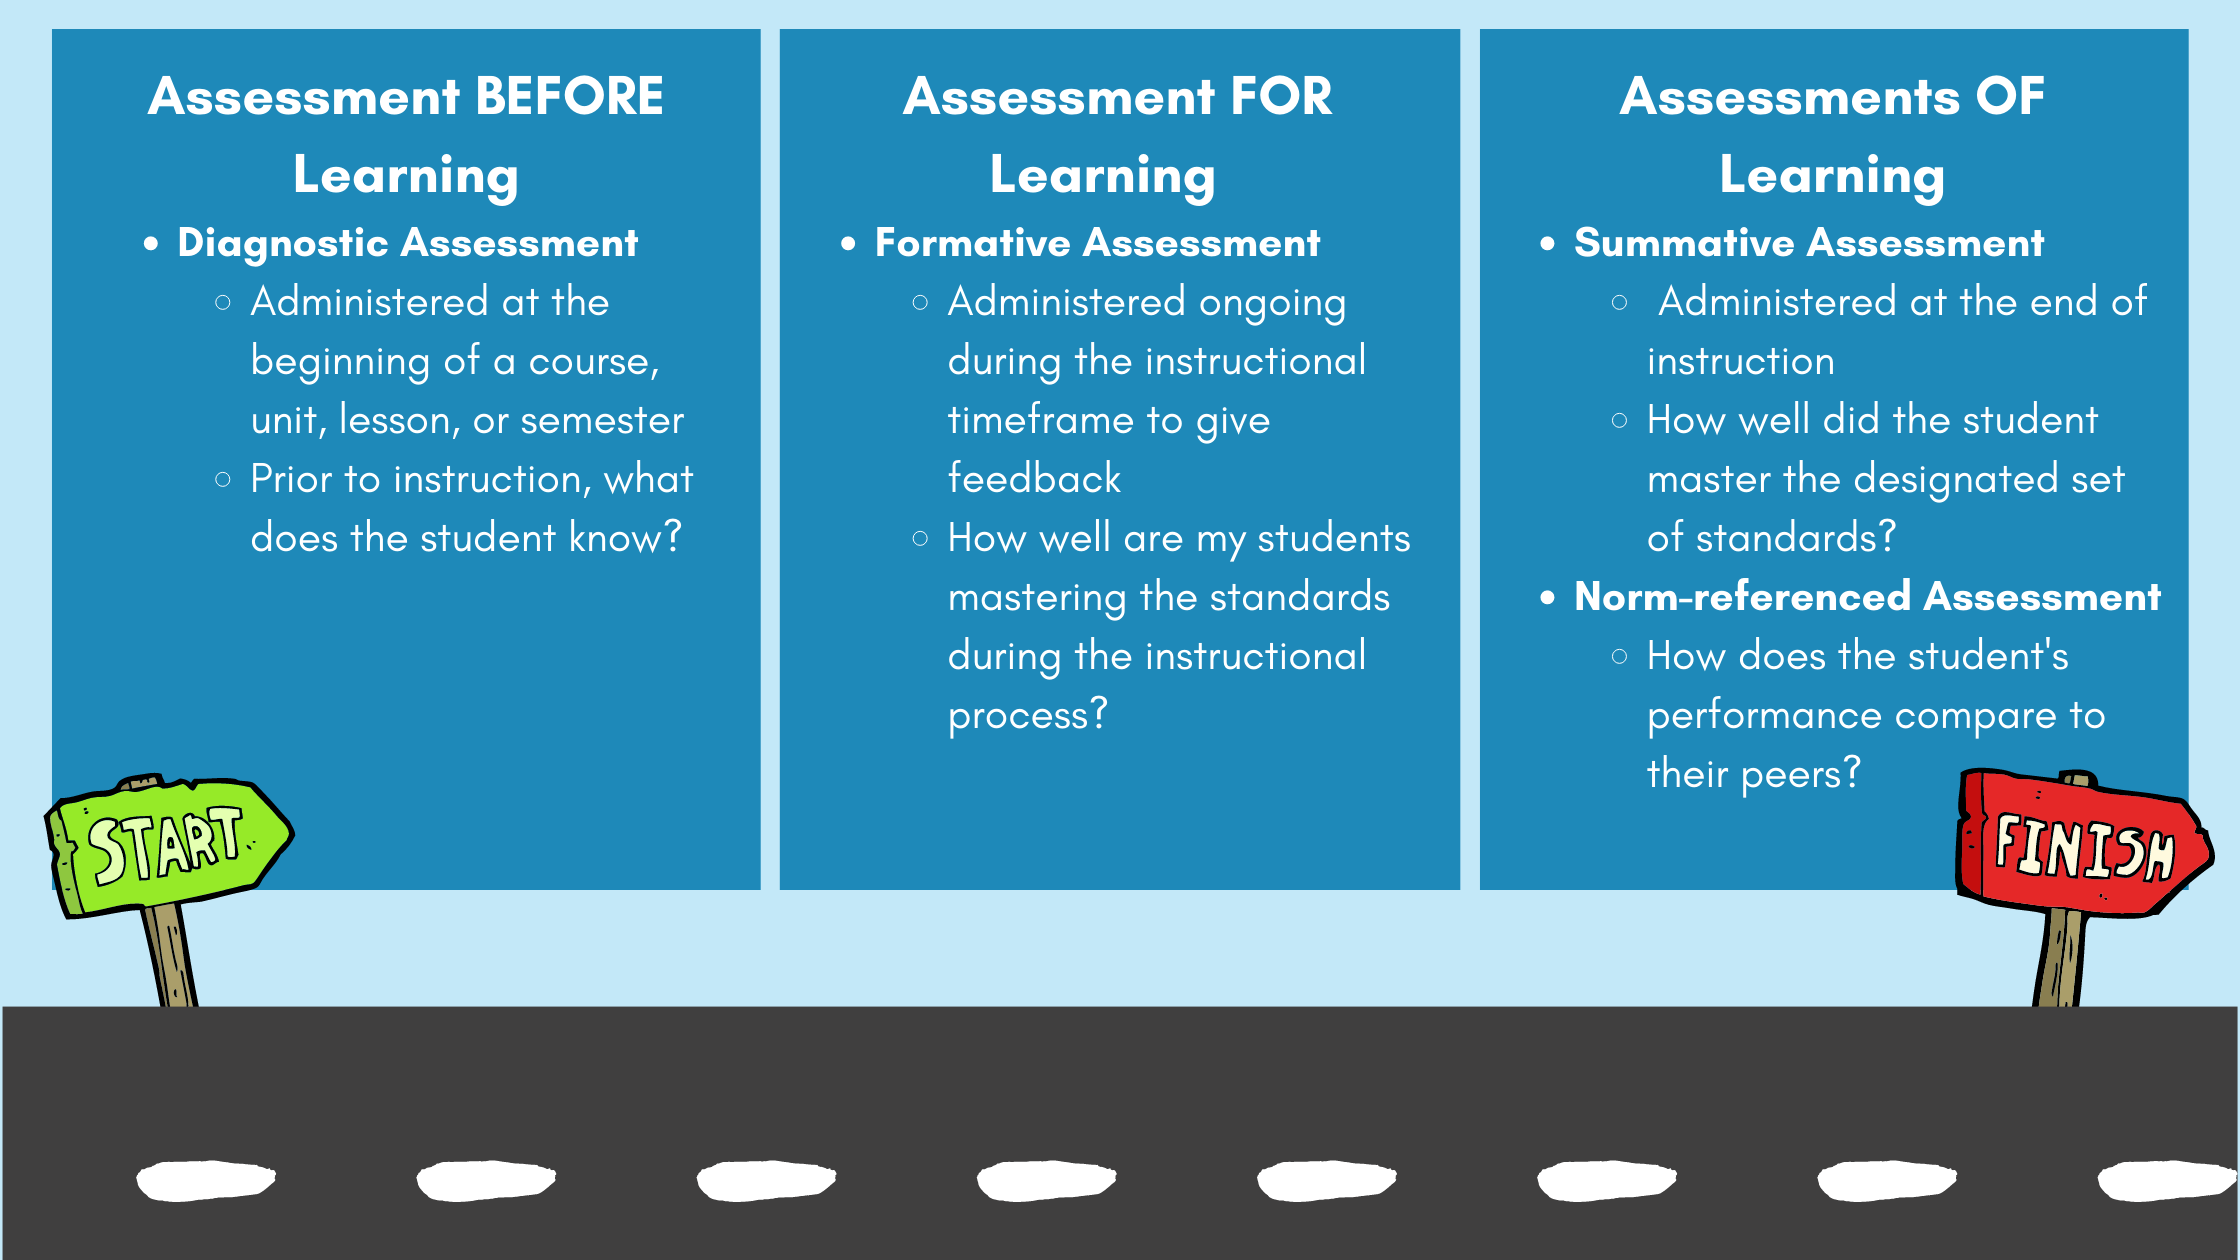 Summary of Assessments